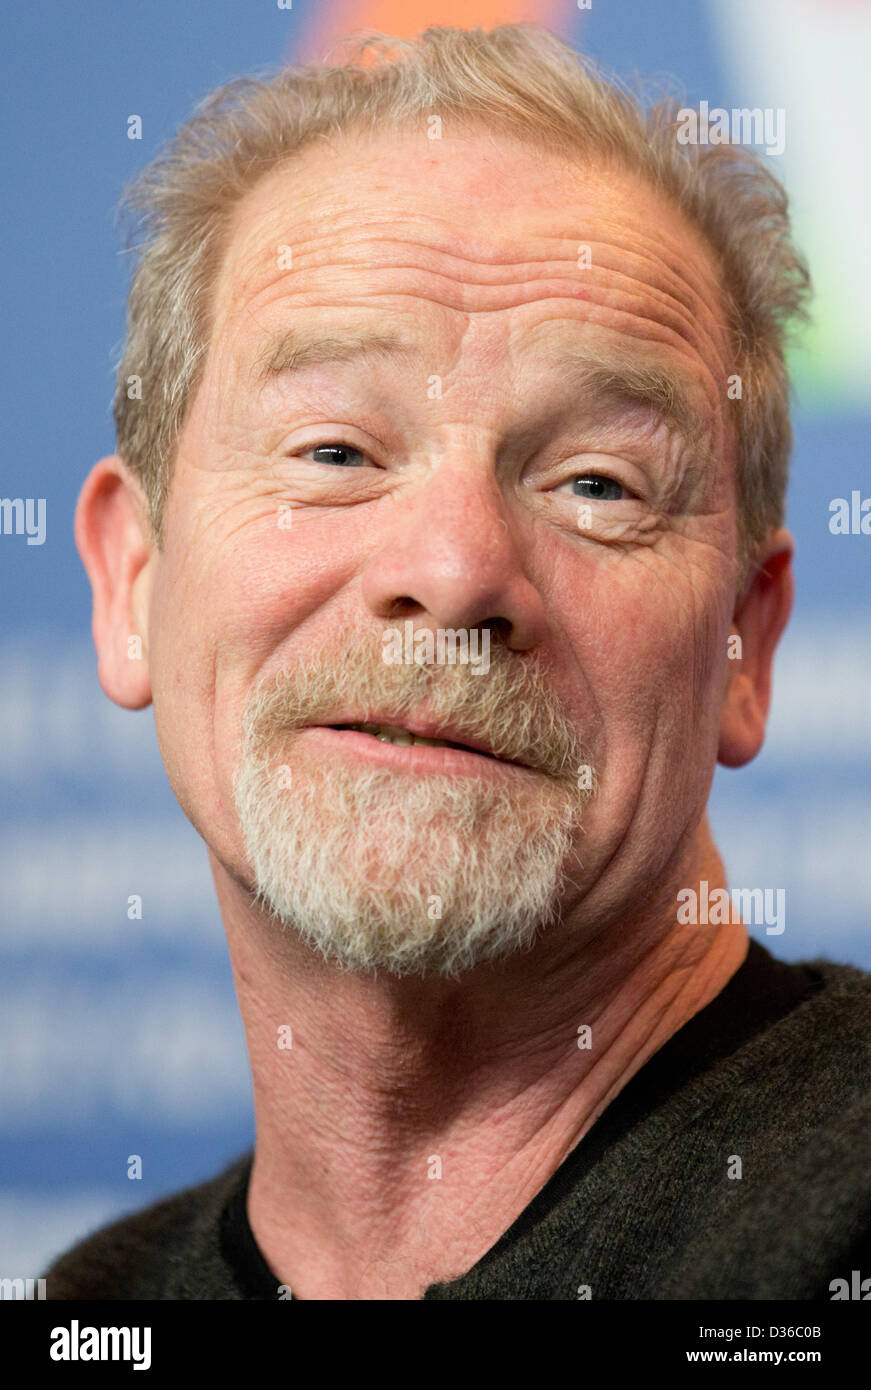 Berlin, Germany. 11th February 2013. Scottish actor Peter Mullan smiles at a press conference for 'Top of the lake' during the 63rd annual Berlin International Film Festival in Berlin, Germany, 11 February 2013. The movie is presented in section Berlinale Special at the Berlinale running from 07 to 17 February. Photo: Kay Nietfeld/dpa/Alamy Live News Stock Photo